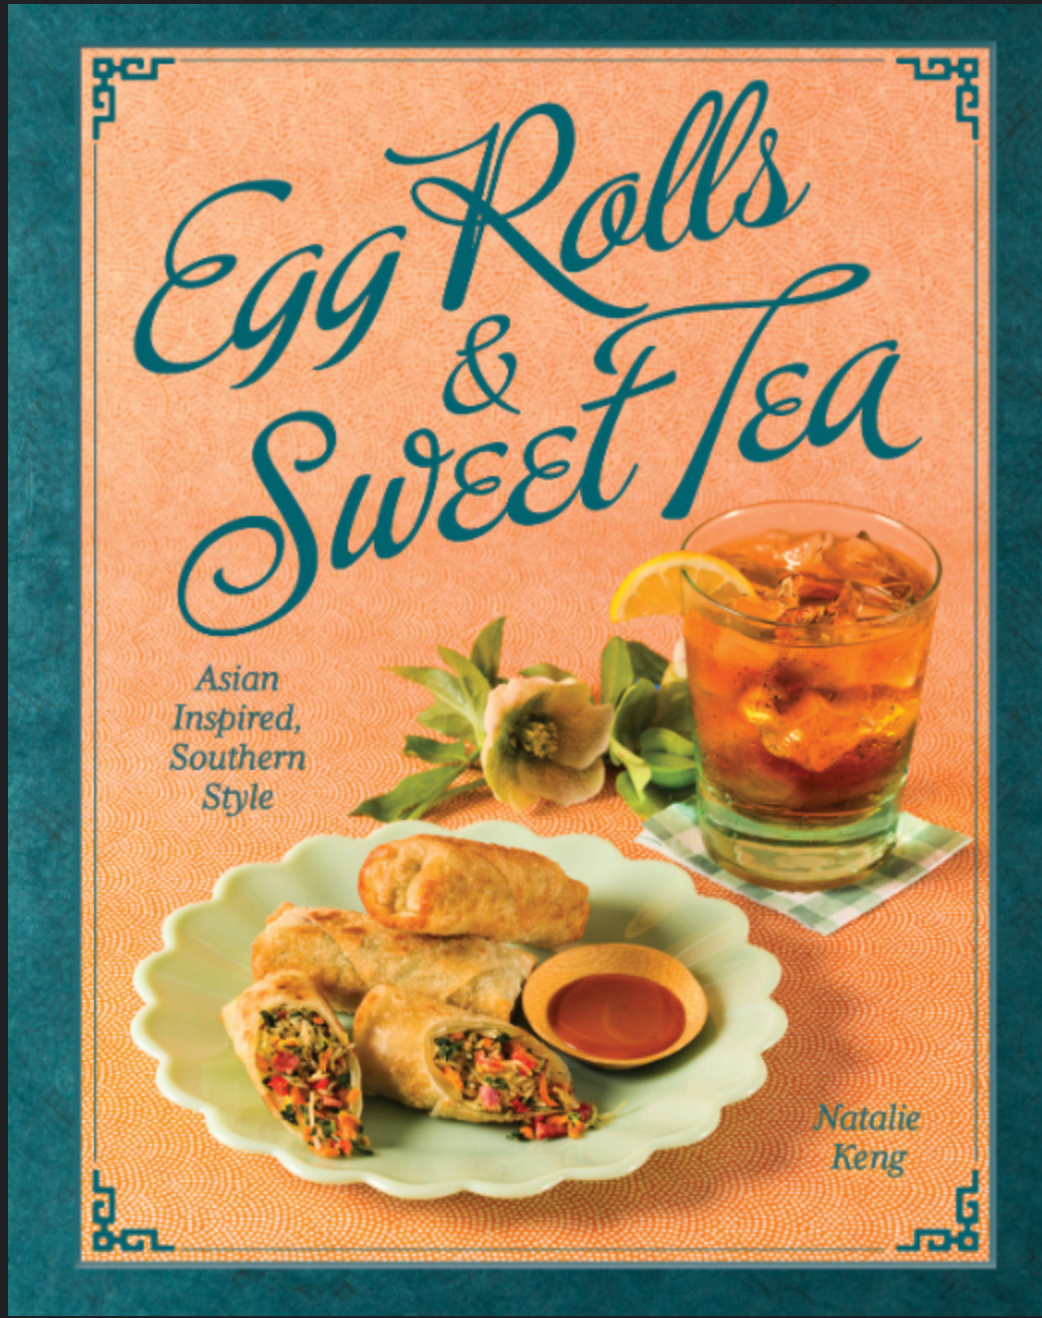 Egg Rolls & Sweet Tea: Asian Inspired, Southern Style (Case of 10)